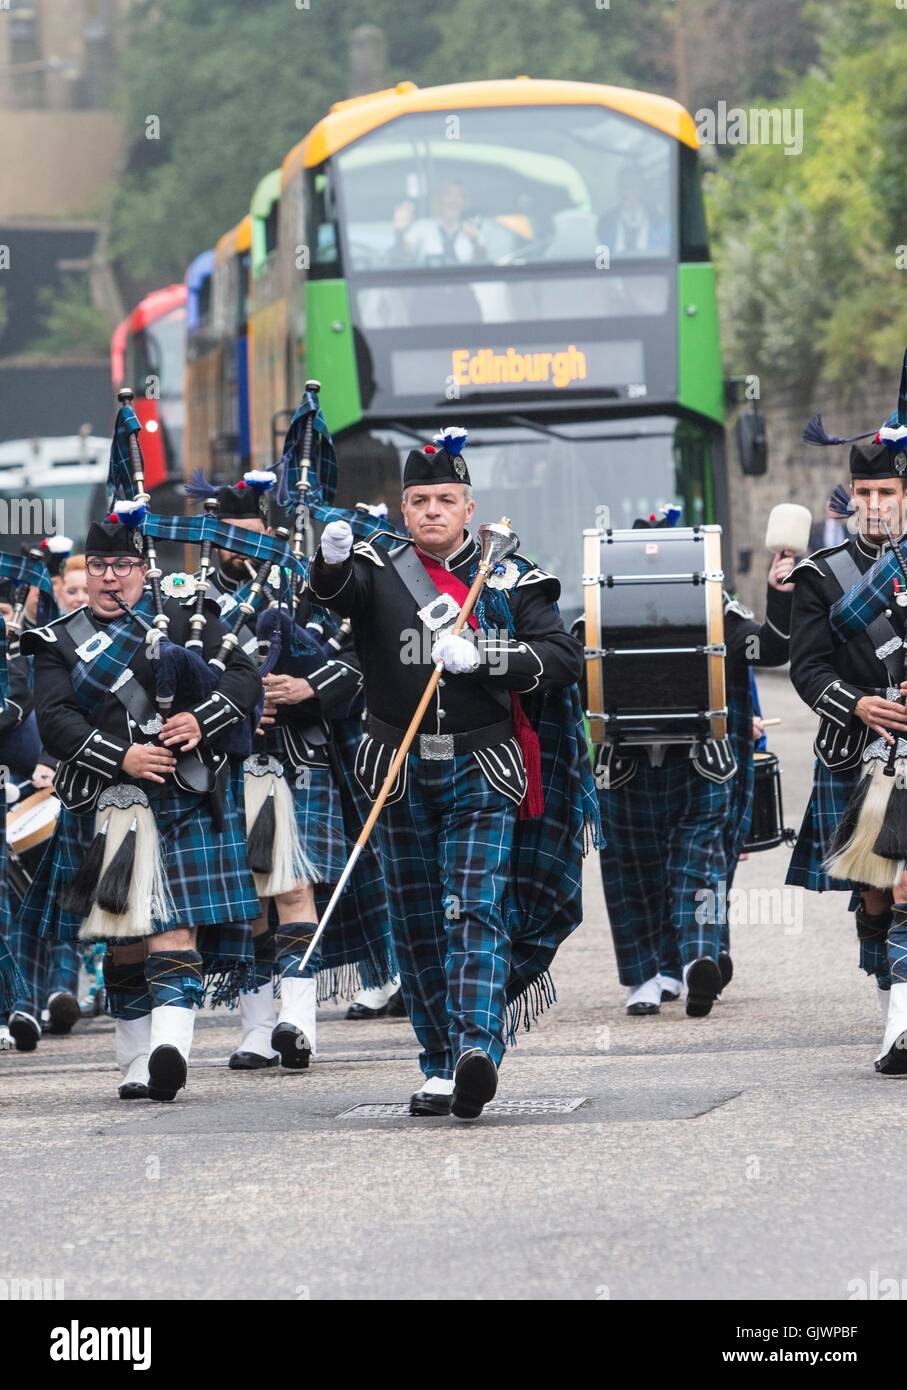 Edinburgh, Scotland, UK. 18th August, 2016. Military Tattoo pipers unveil new open-top tour buses. Lothian Buses has invested in 30 new open-top double deck vehicles for Edinburgh Bus Tours. The buses will begin operating across three of its routes in the coming weeks. Credit:  Richard Dyson/Alamy Live News Stock Photo